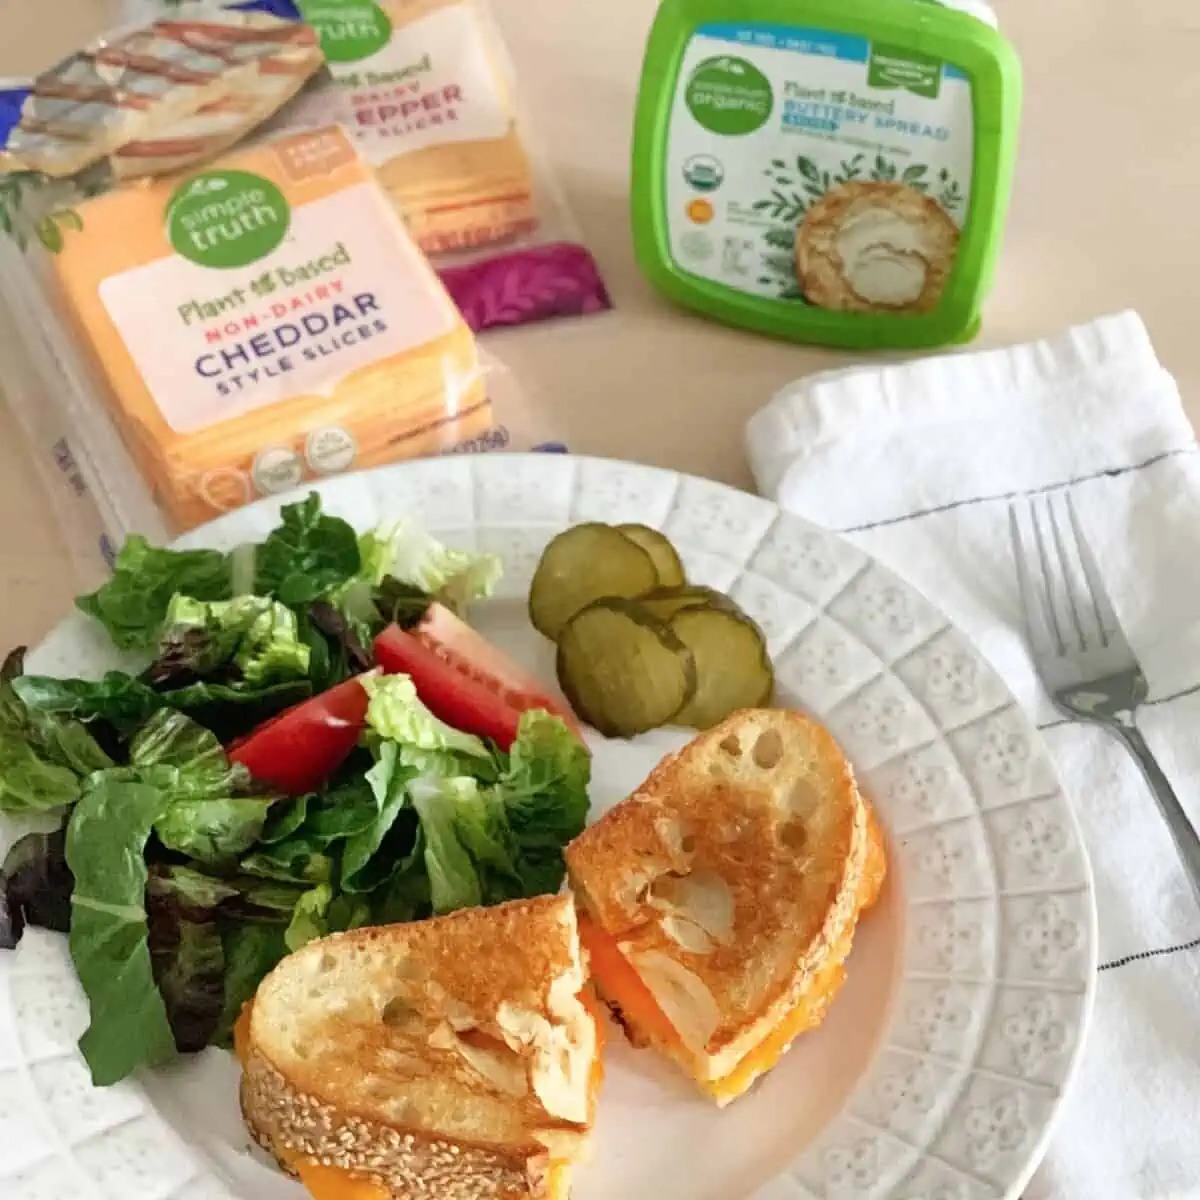 A plate filled with a vegan grilled cheese, salad, and pickles next to a package of Simple Truth dairy-free, plant-based cheese slices and buttery spread. 